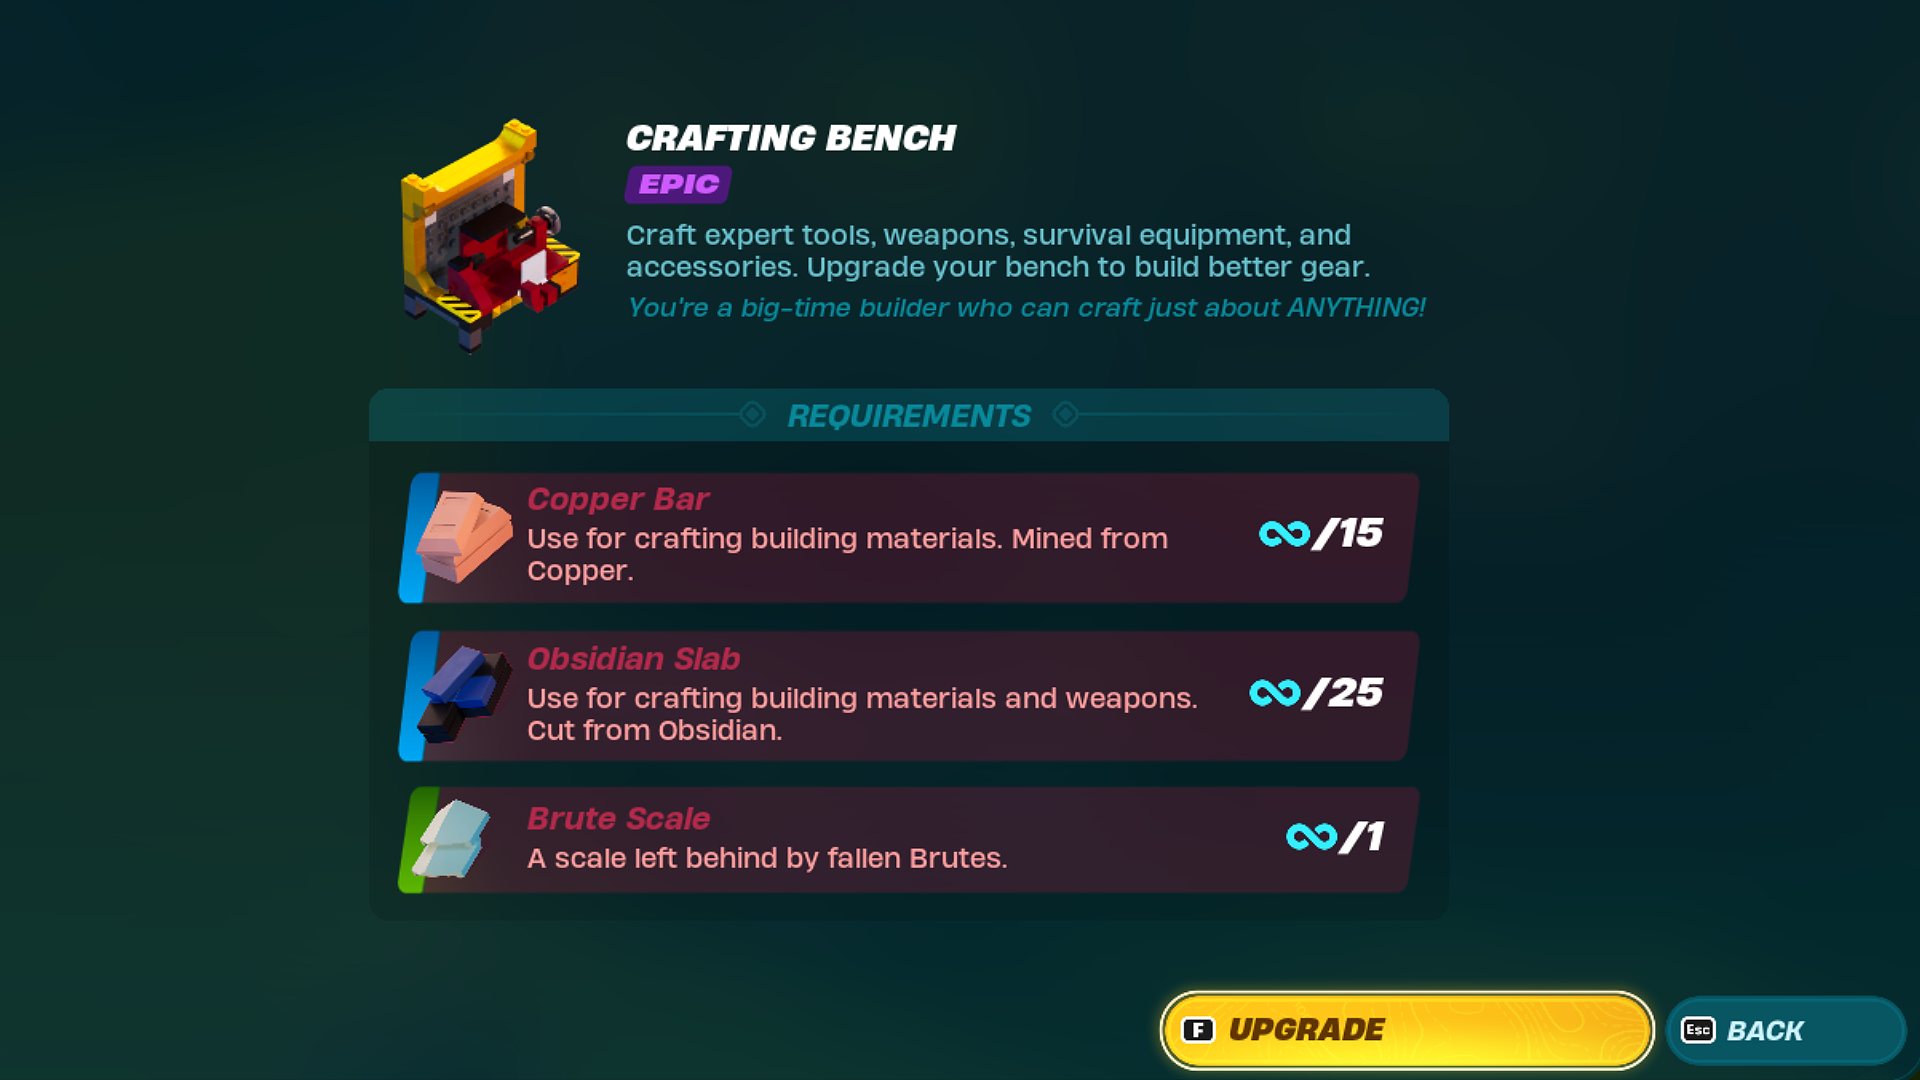 The upgrade recipe for the Crafting Bench in LEGO Fortnite